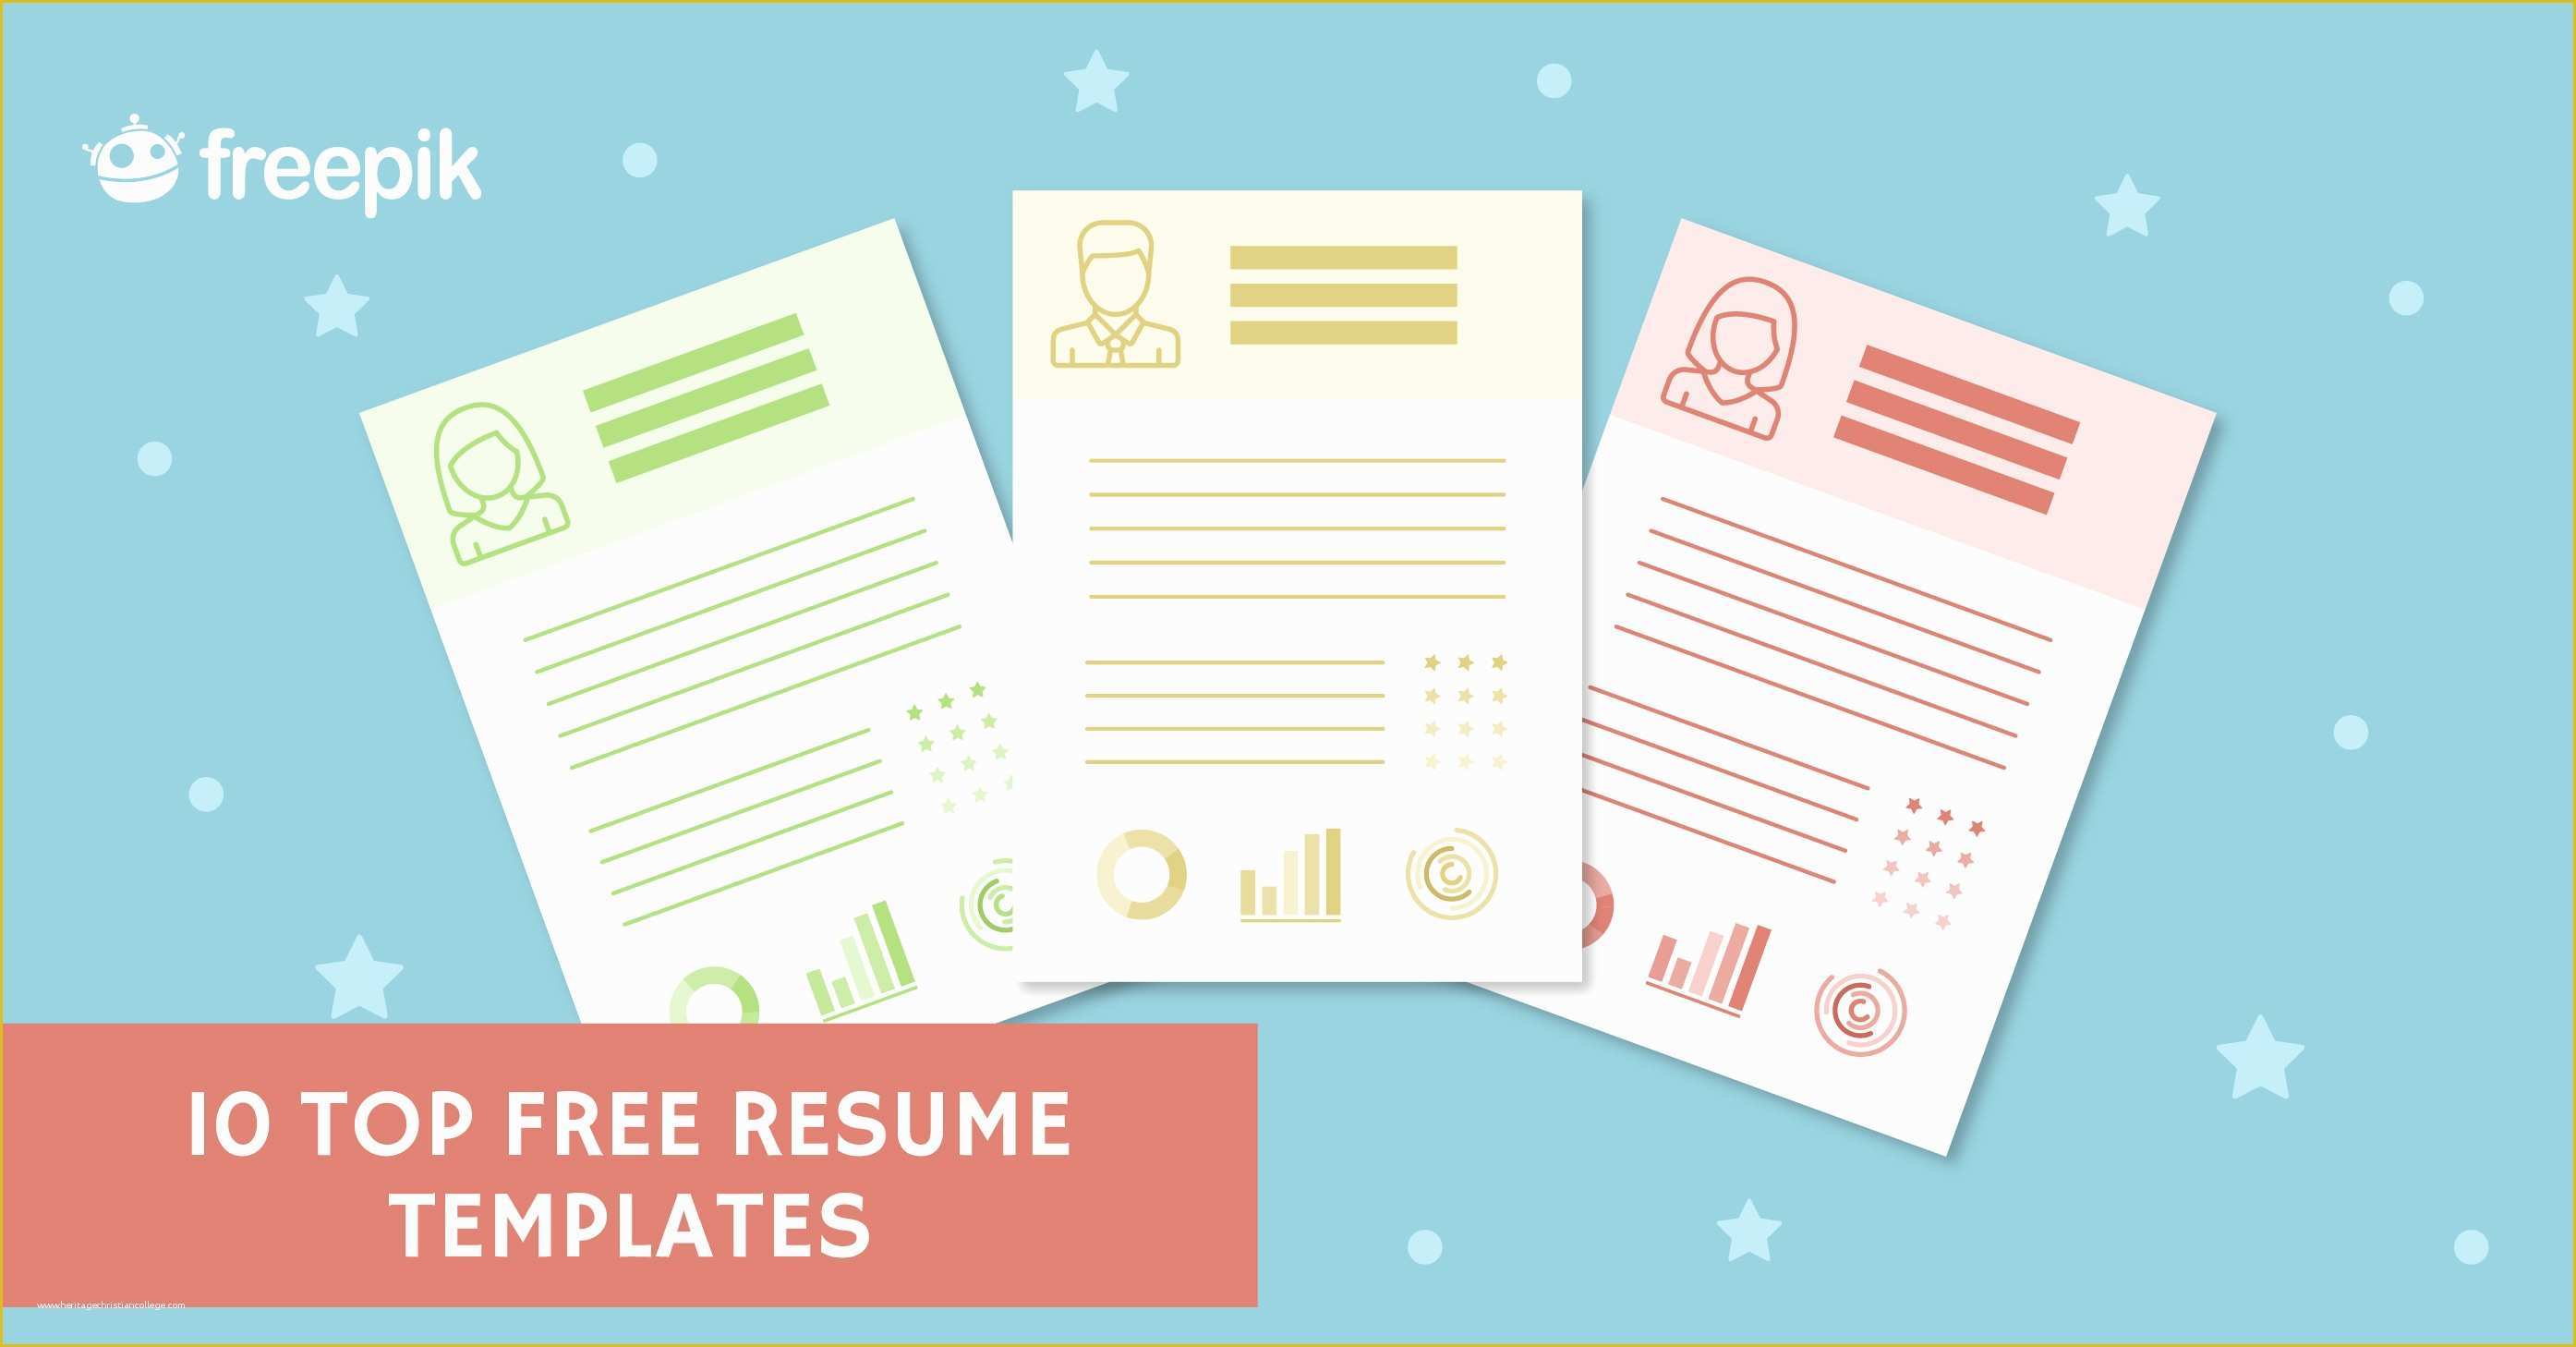 Www Free Templates Com Of 10 top Free Resume Templates Freepik Blog Freepik Blog